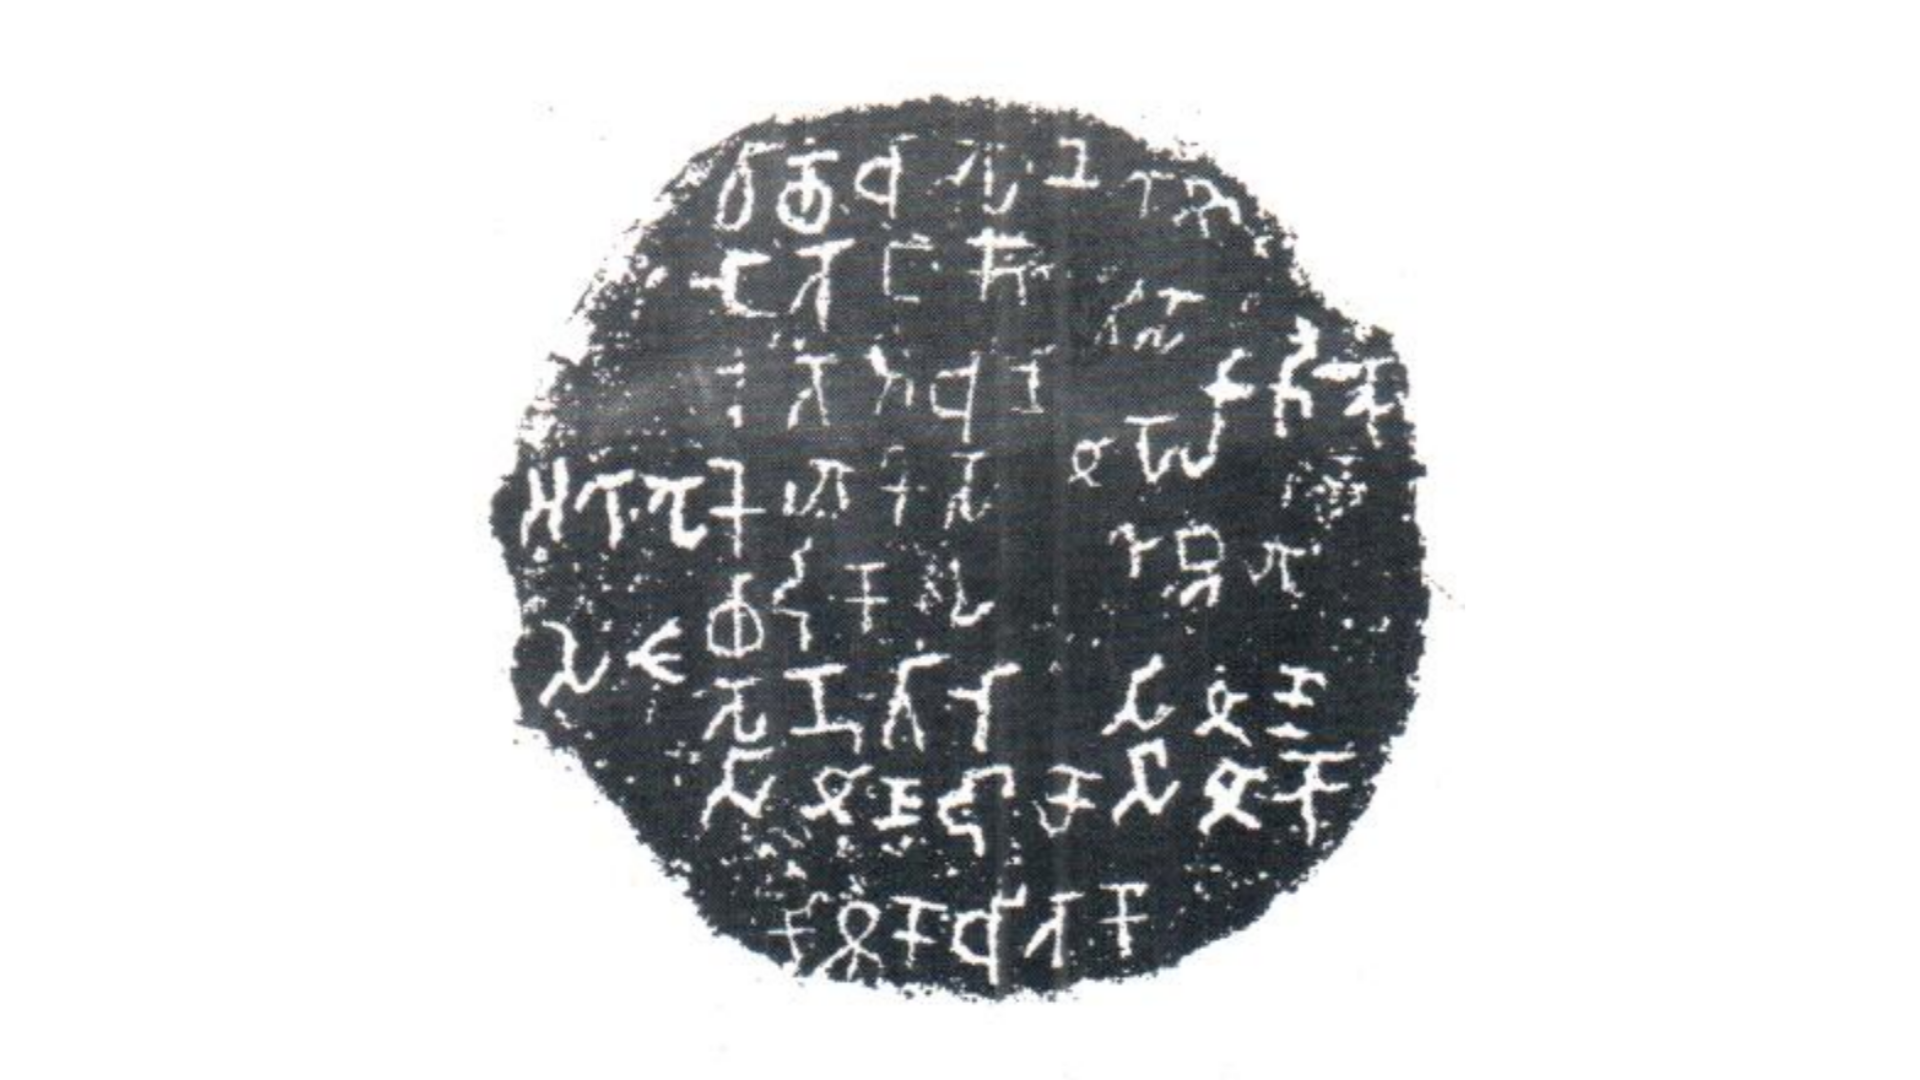 Stone Inscription from Bhattiprolu believed to be from 3rd century BCE